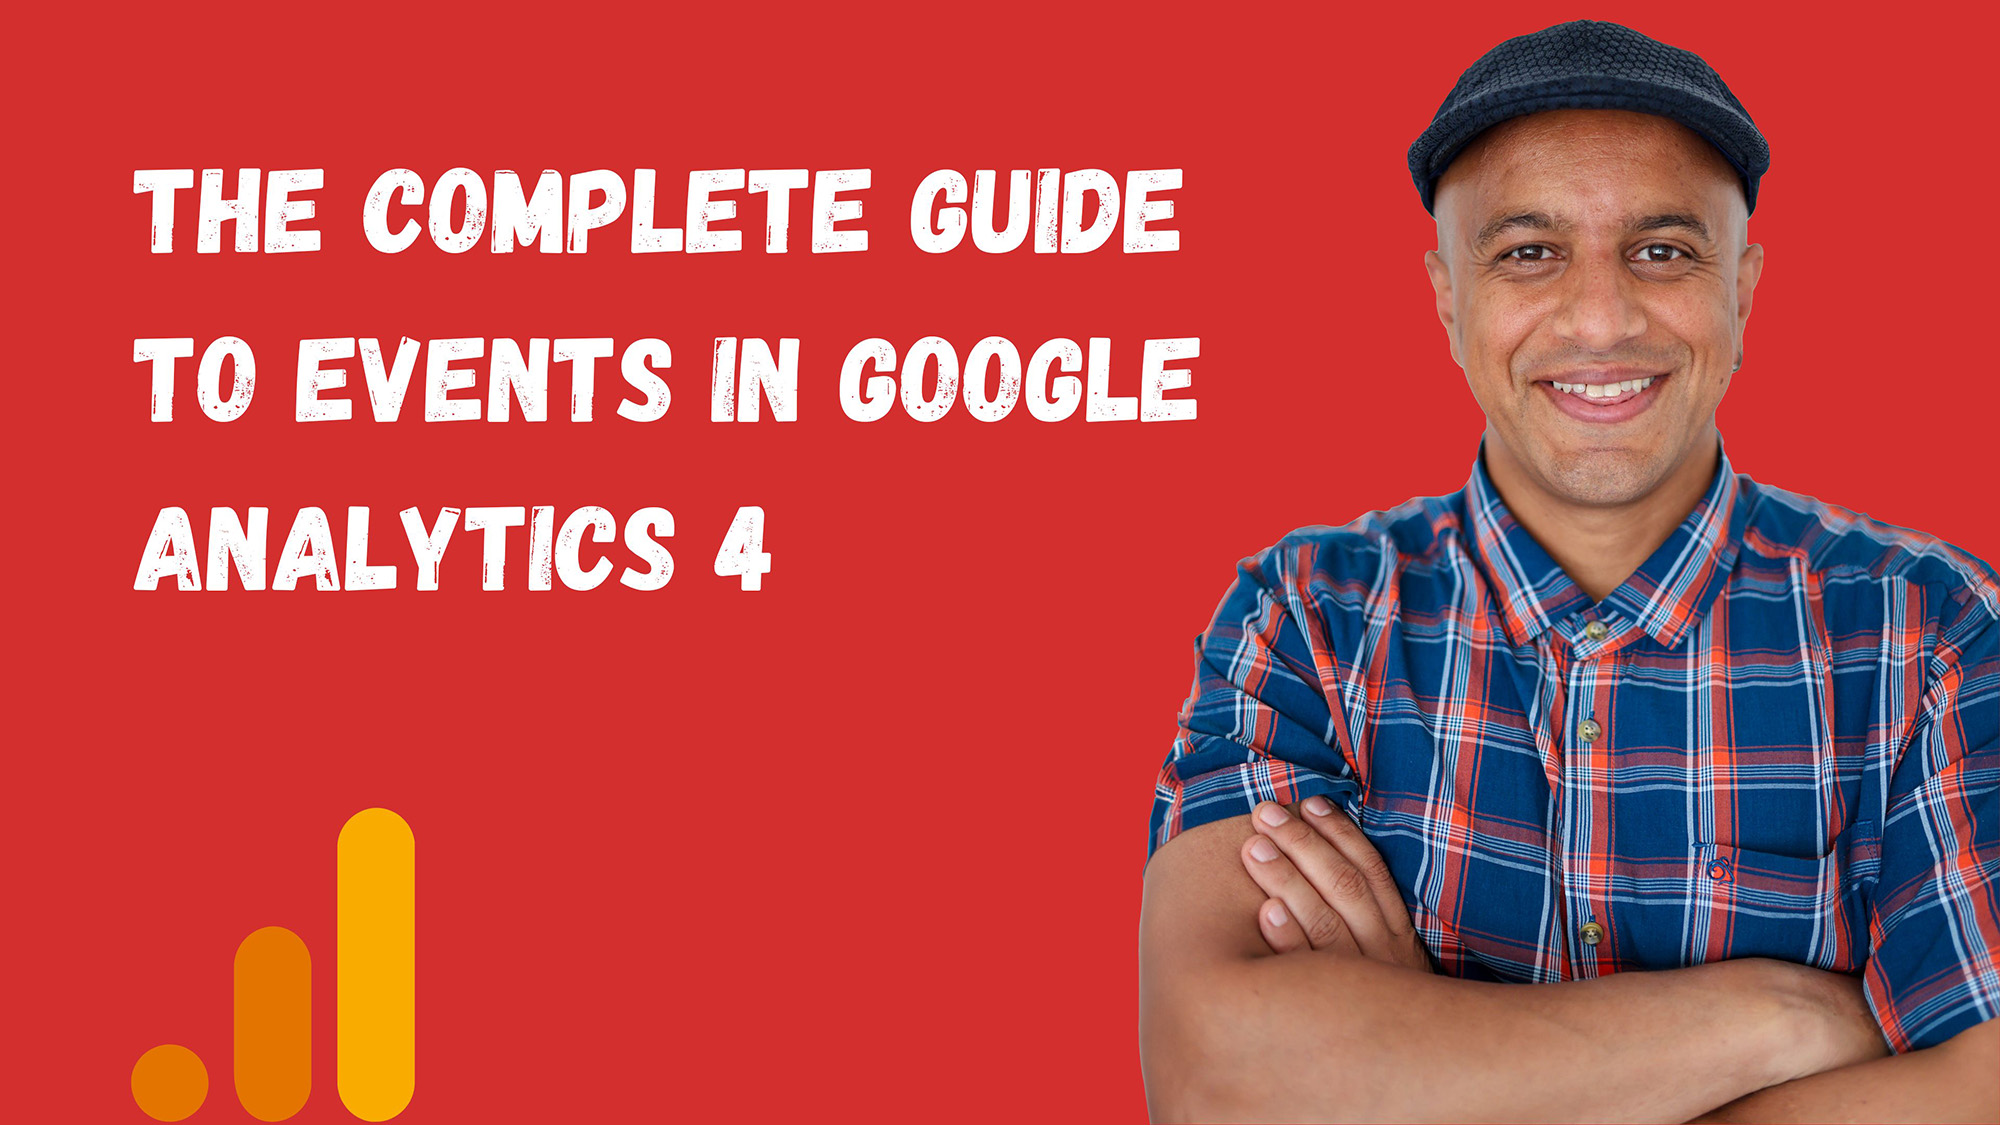 The Complete Guide to Events in Google Analytics 4